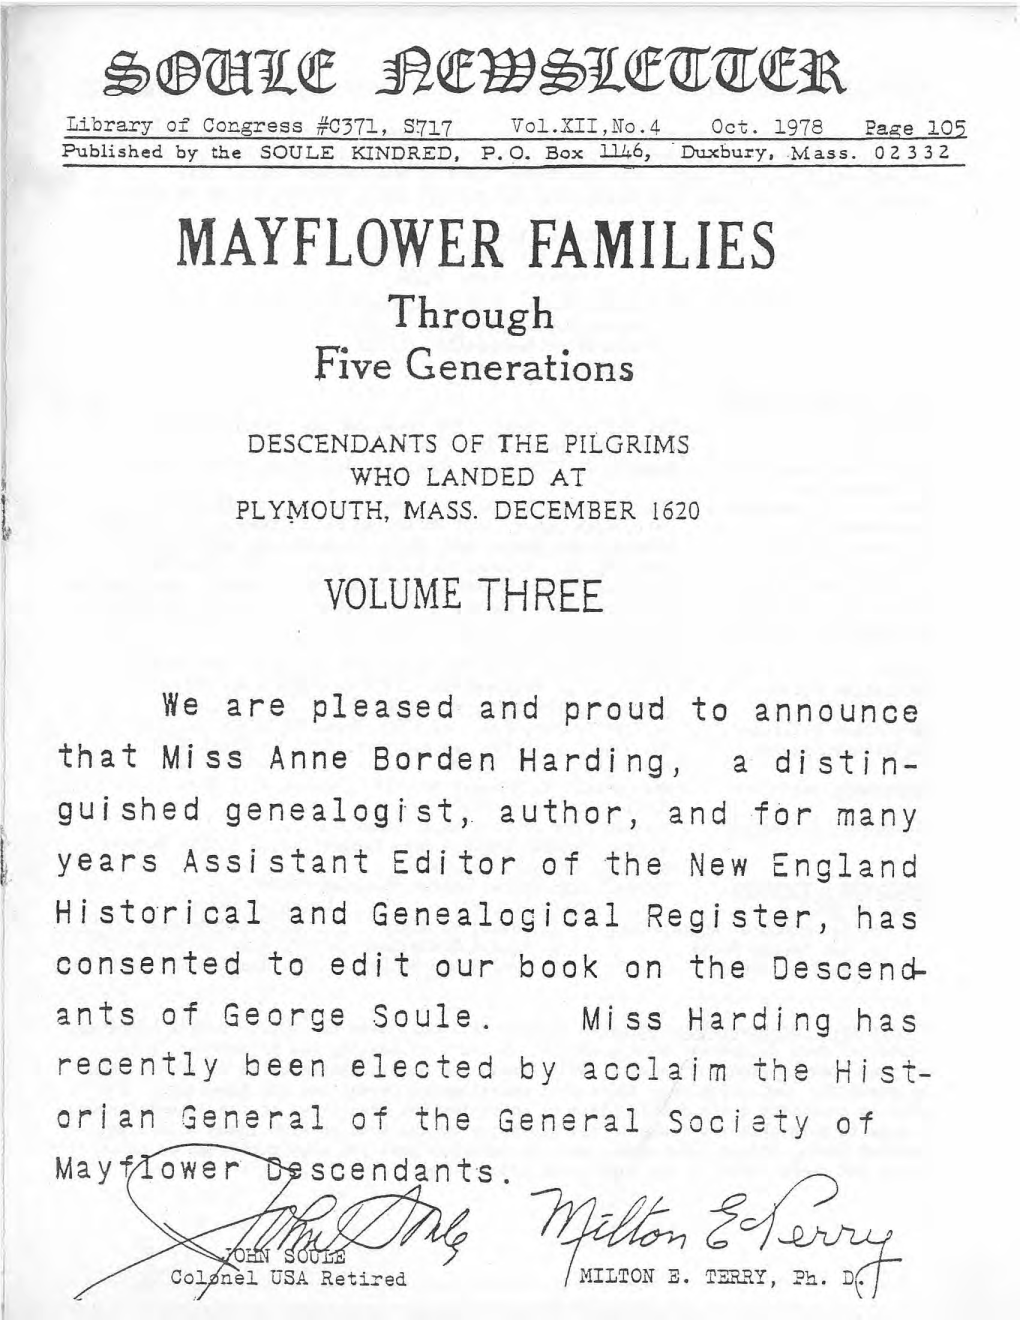 MAYFLOWER FAMILIES Through Five Generations